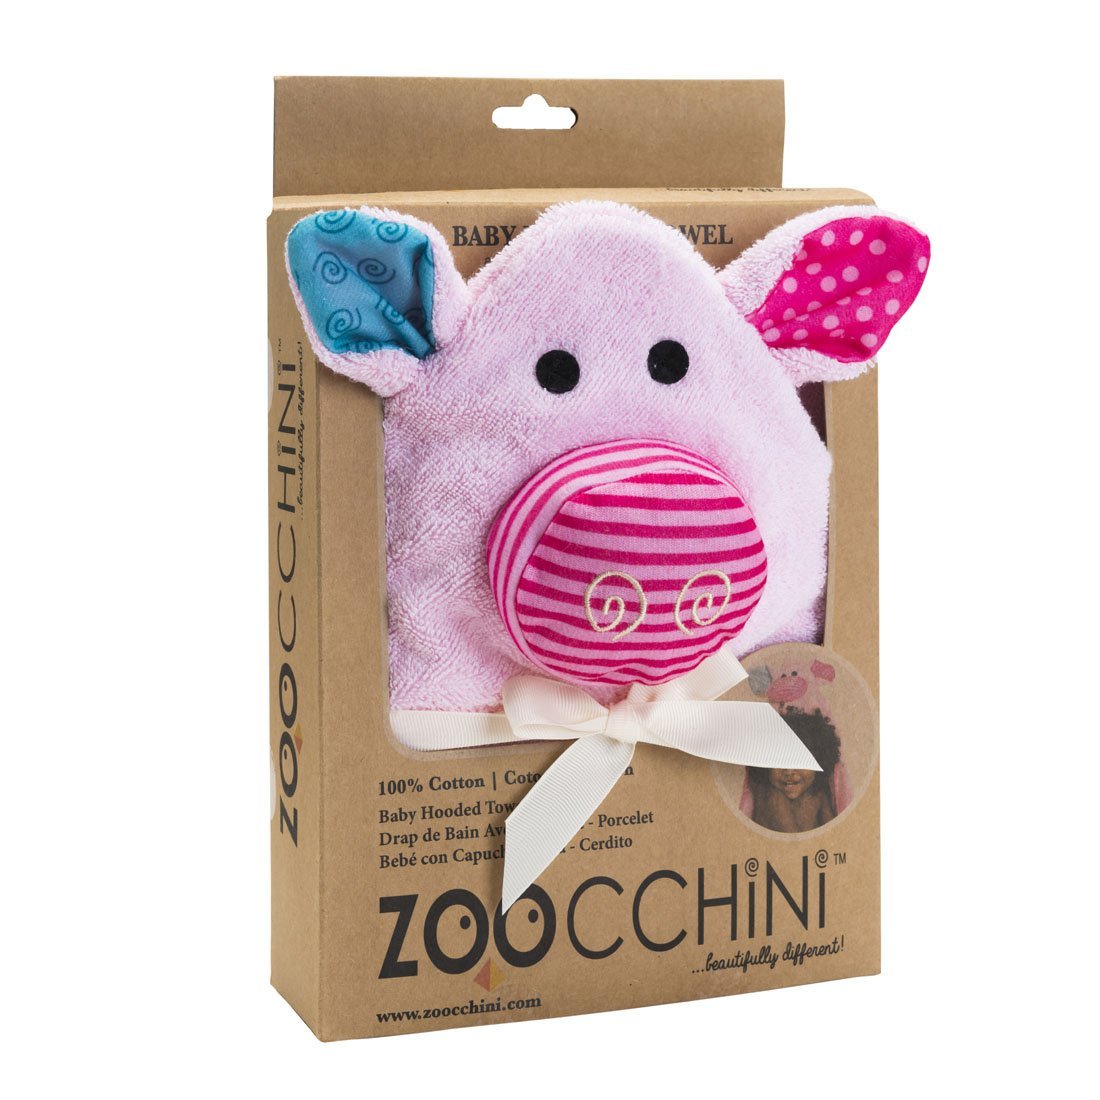 Zoocchini Baby Hooded Towel - Pink the Piglet